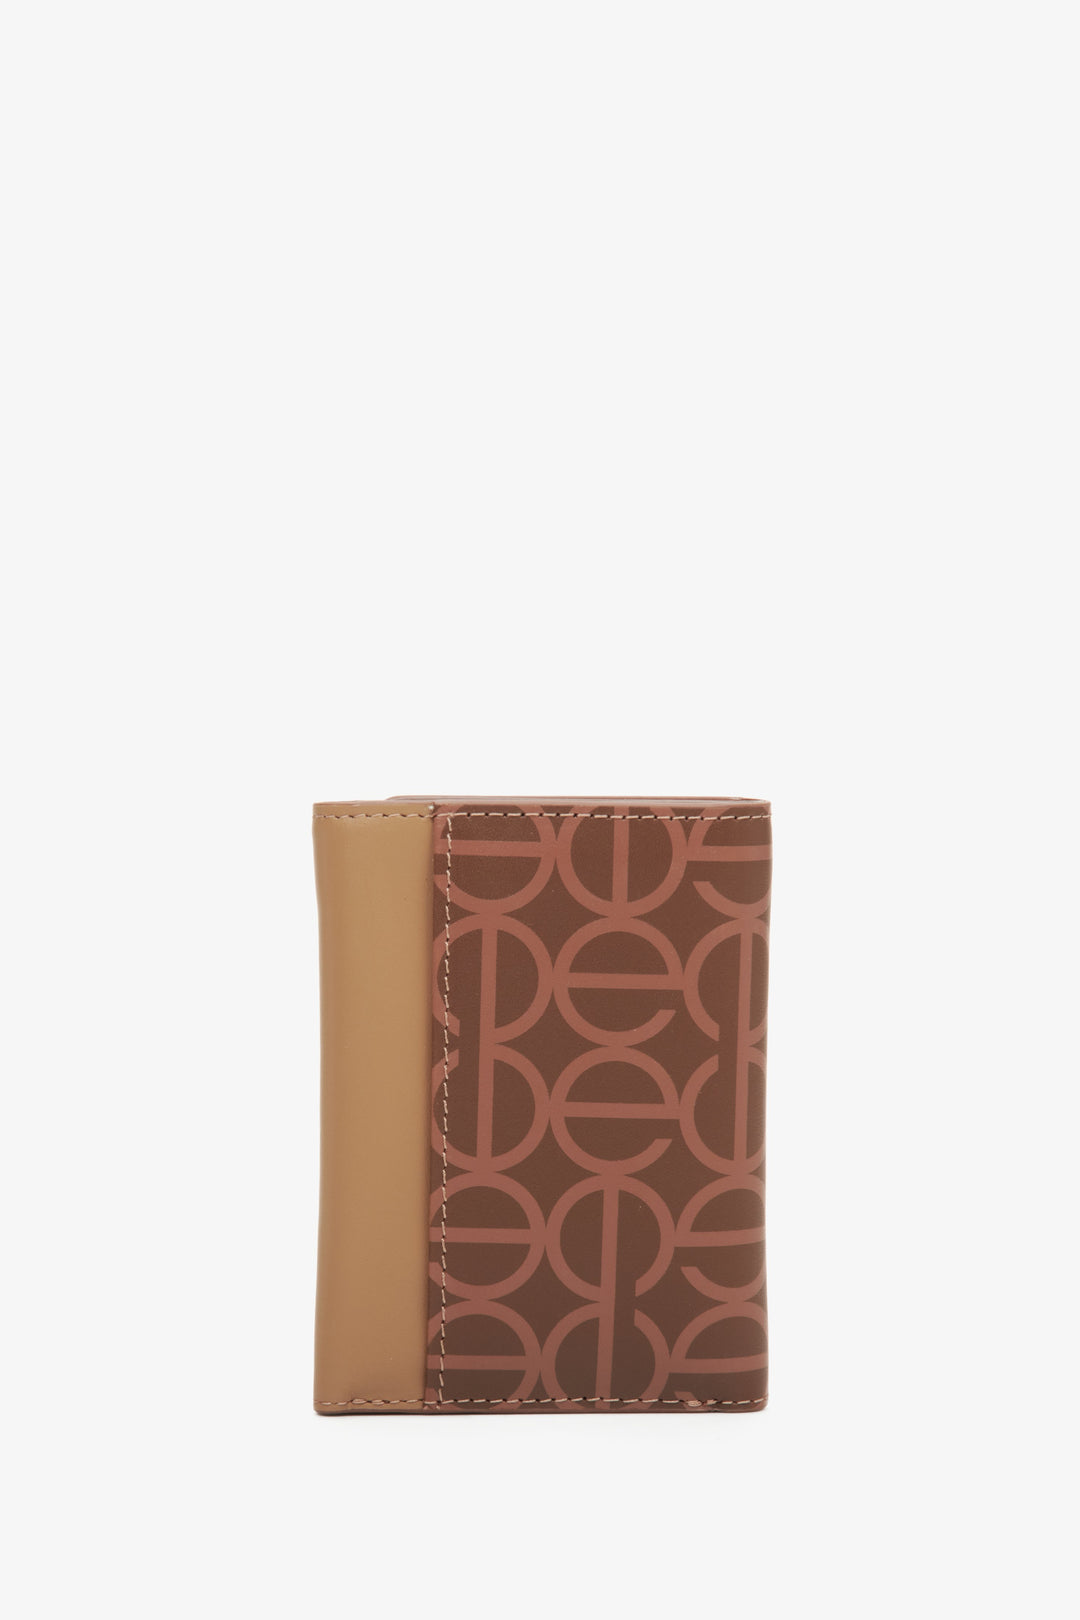 Women's brown wallet by Estro with golden accents - reverse side.